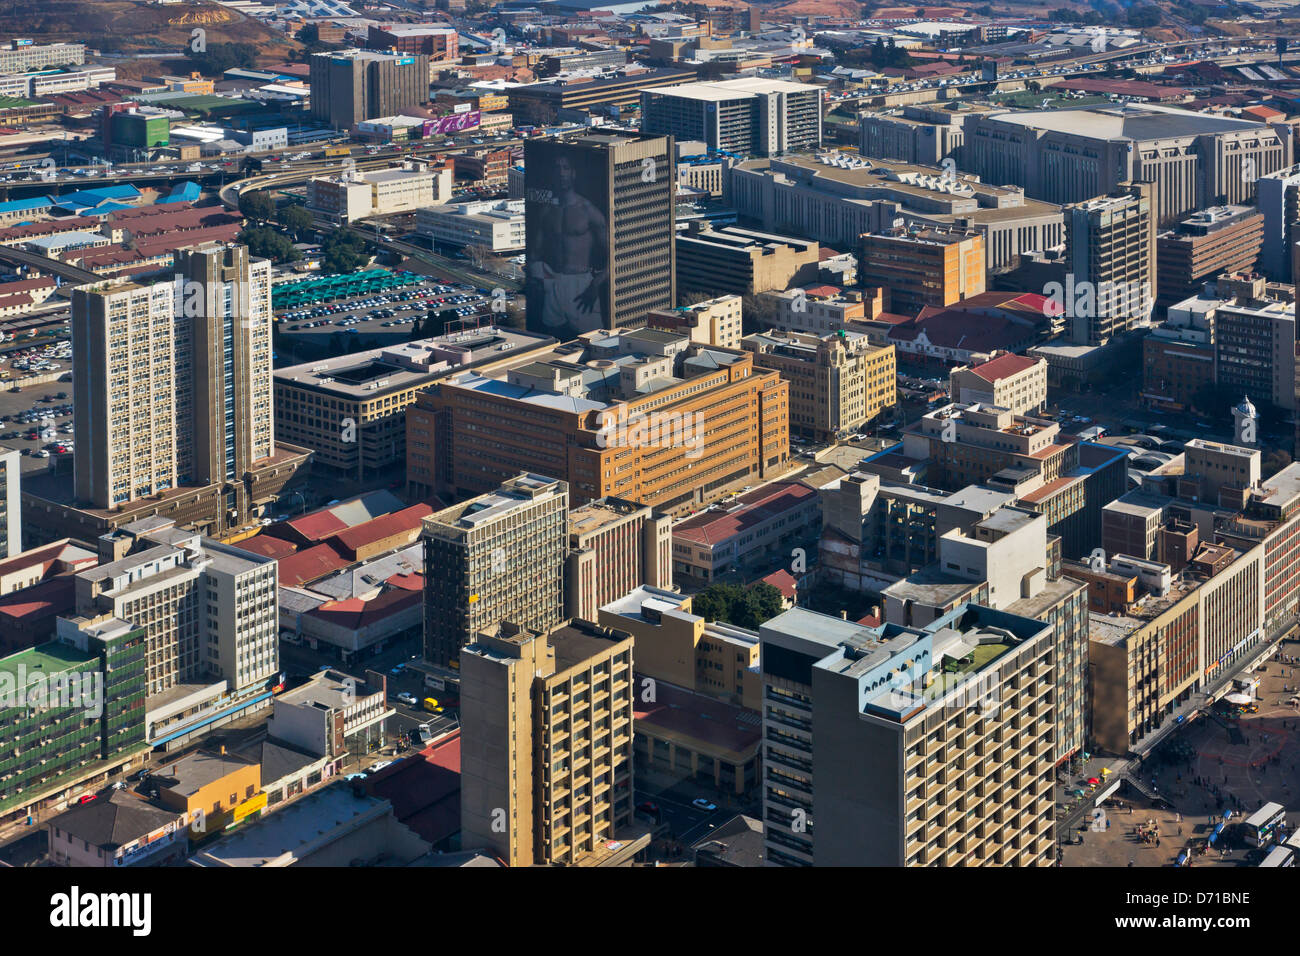 Cityscape in downtown Johannesburg, South Africa Stock Photo